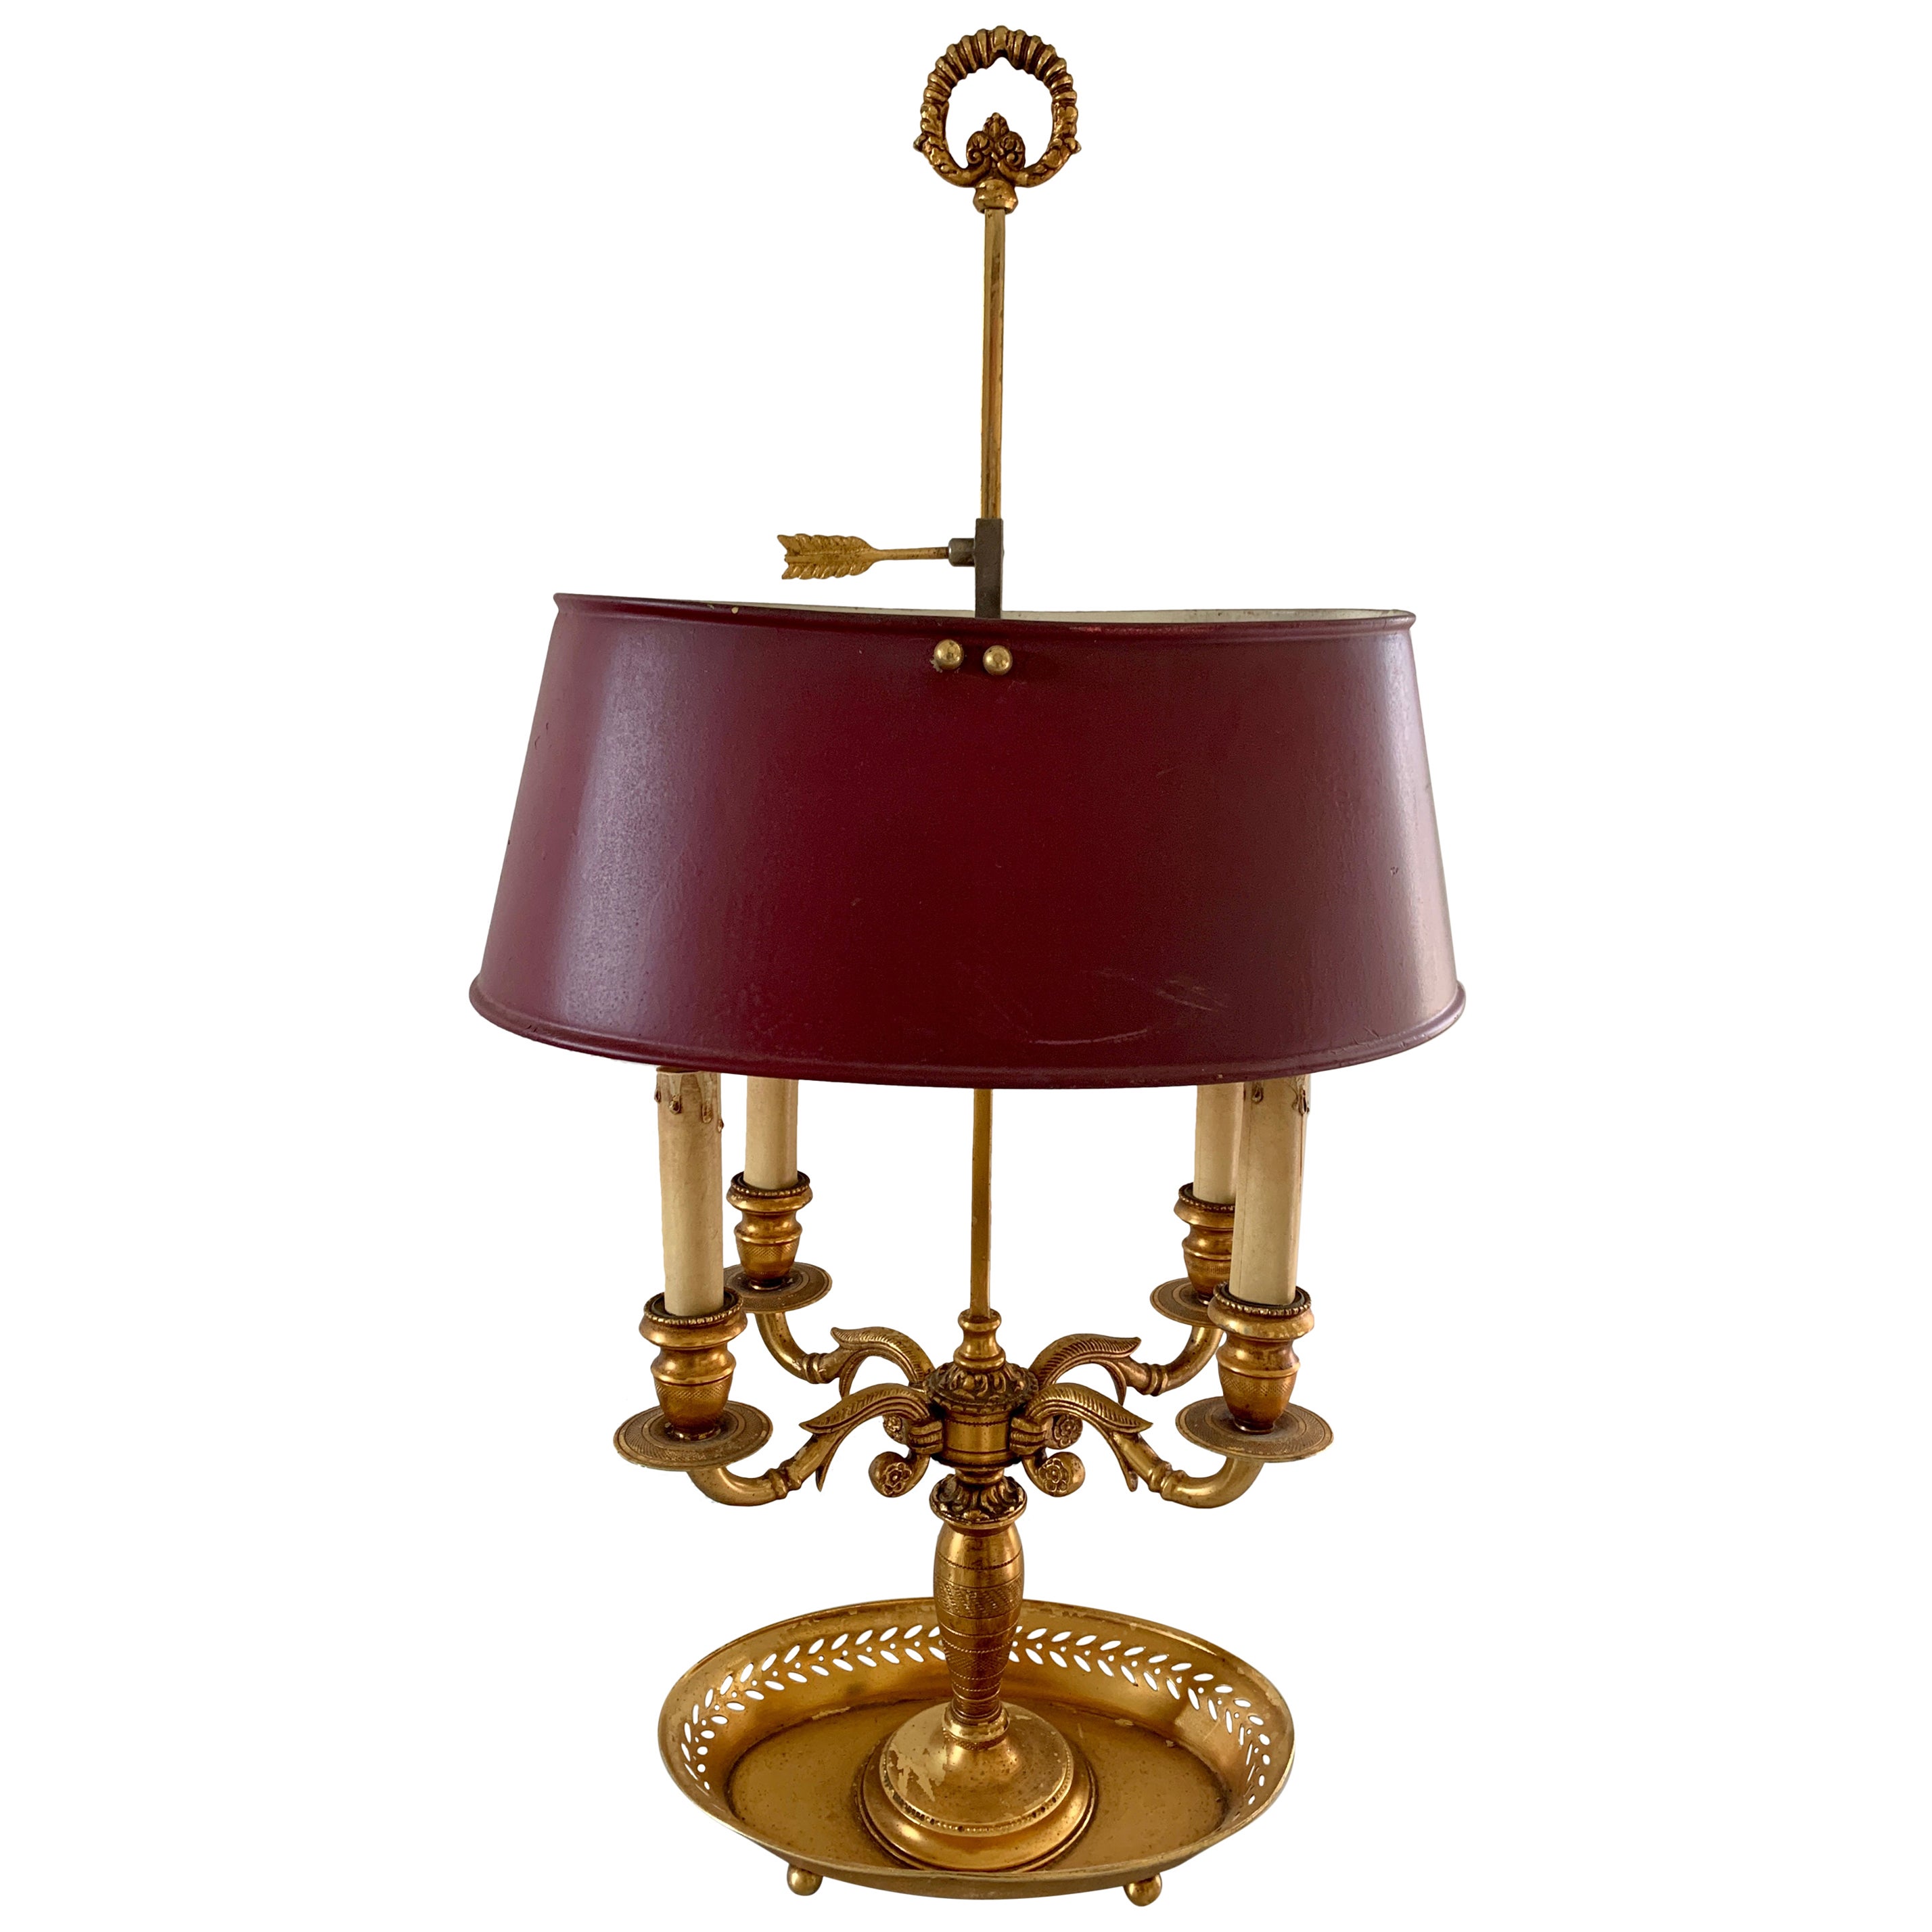 Early 20th Century Brass Four Arm Bouillotte Lamp with Burgundy Tole Shade